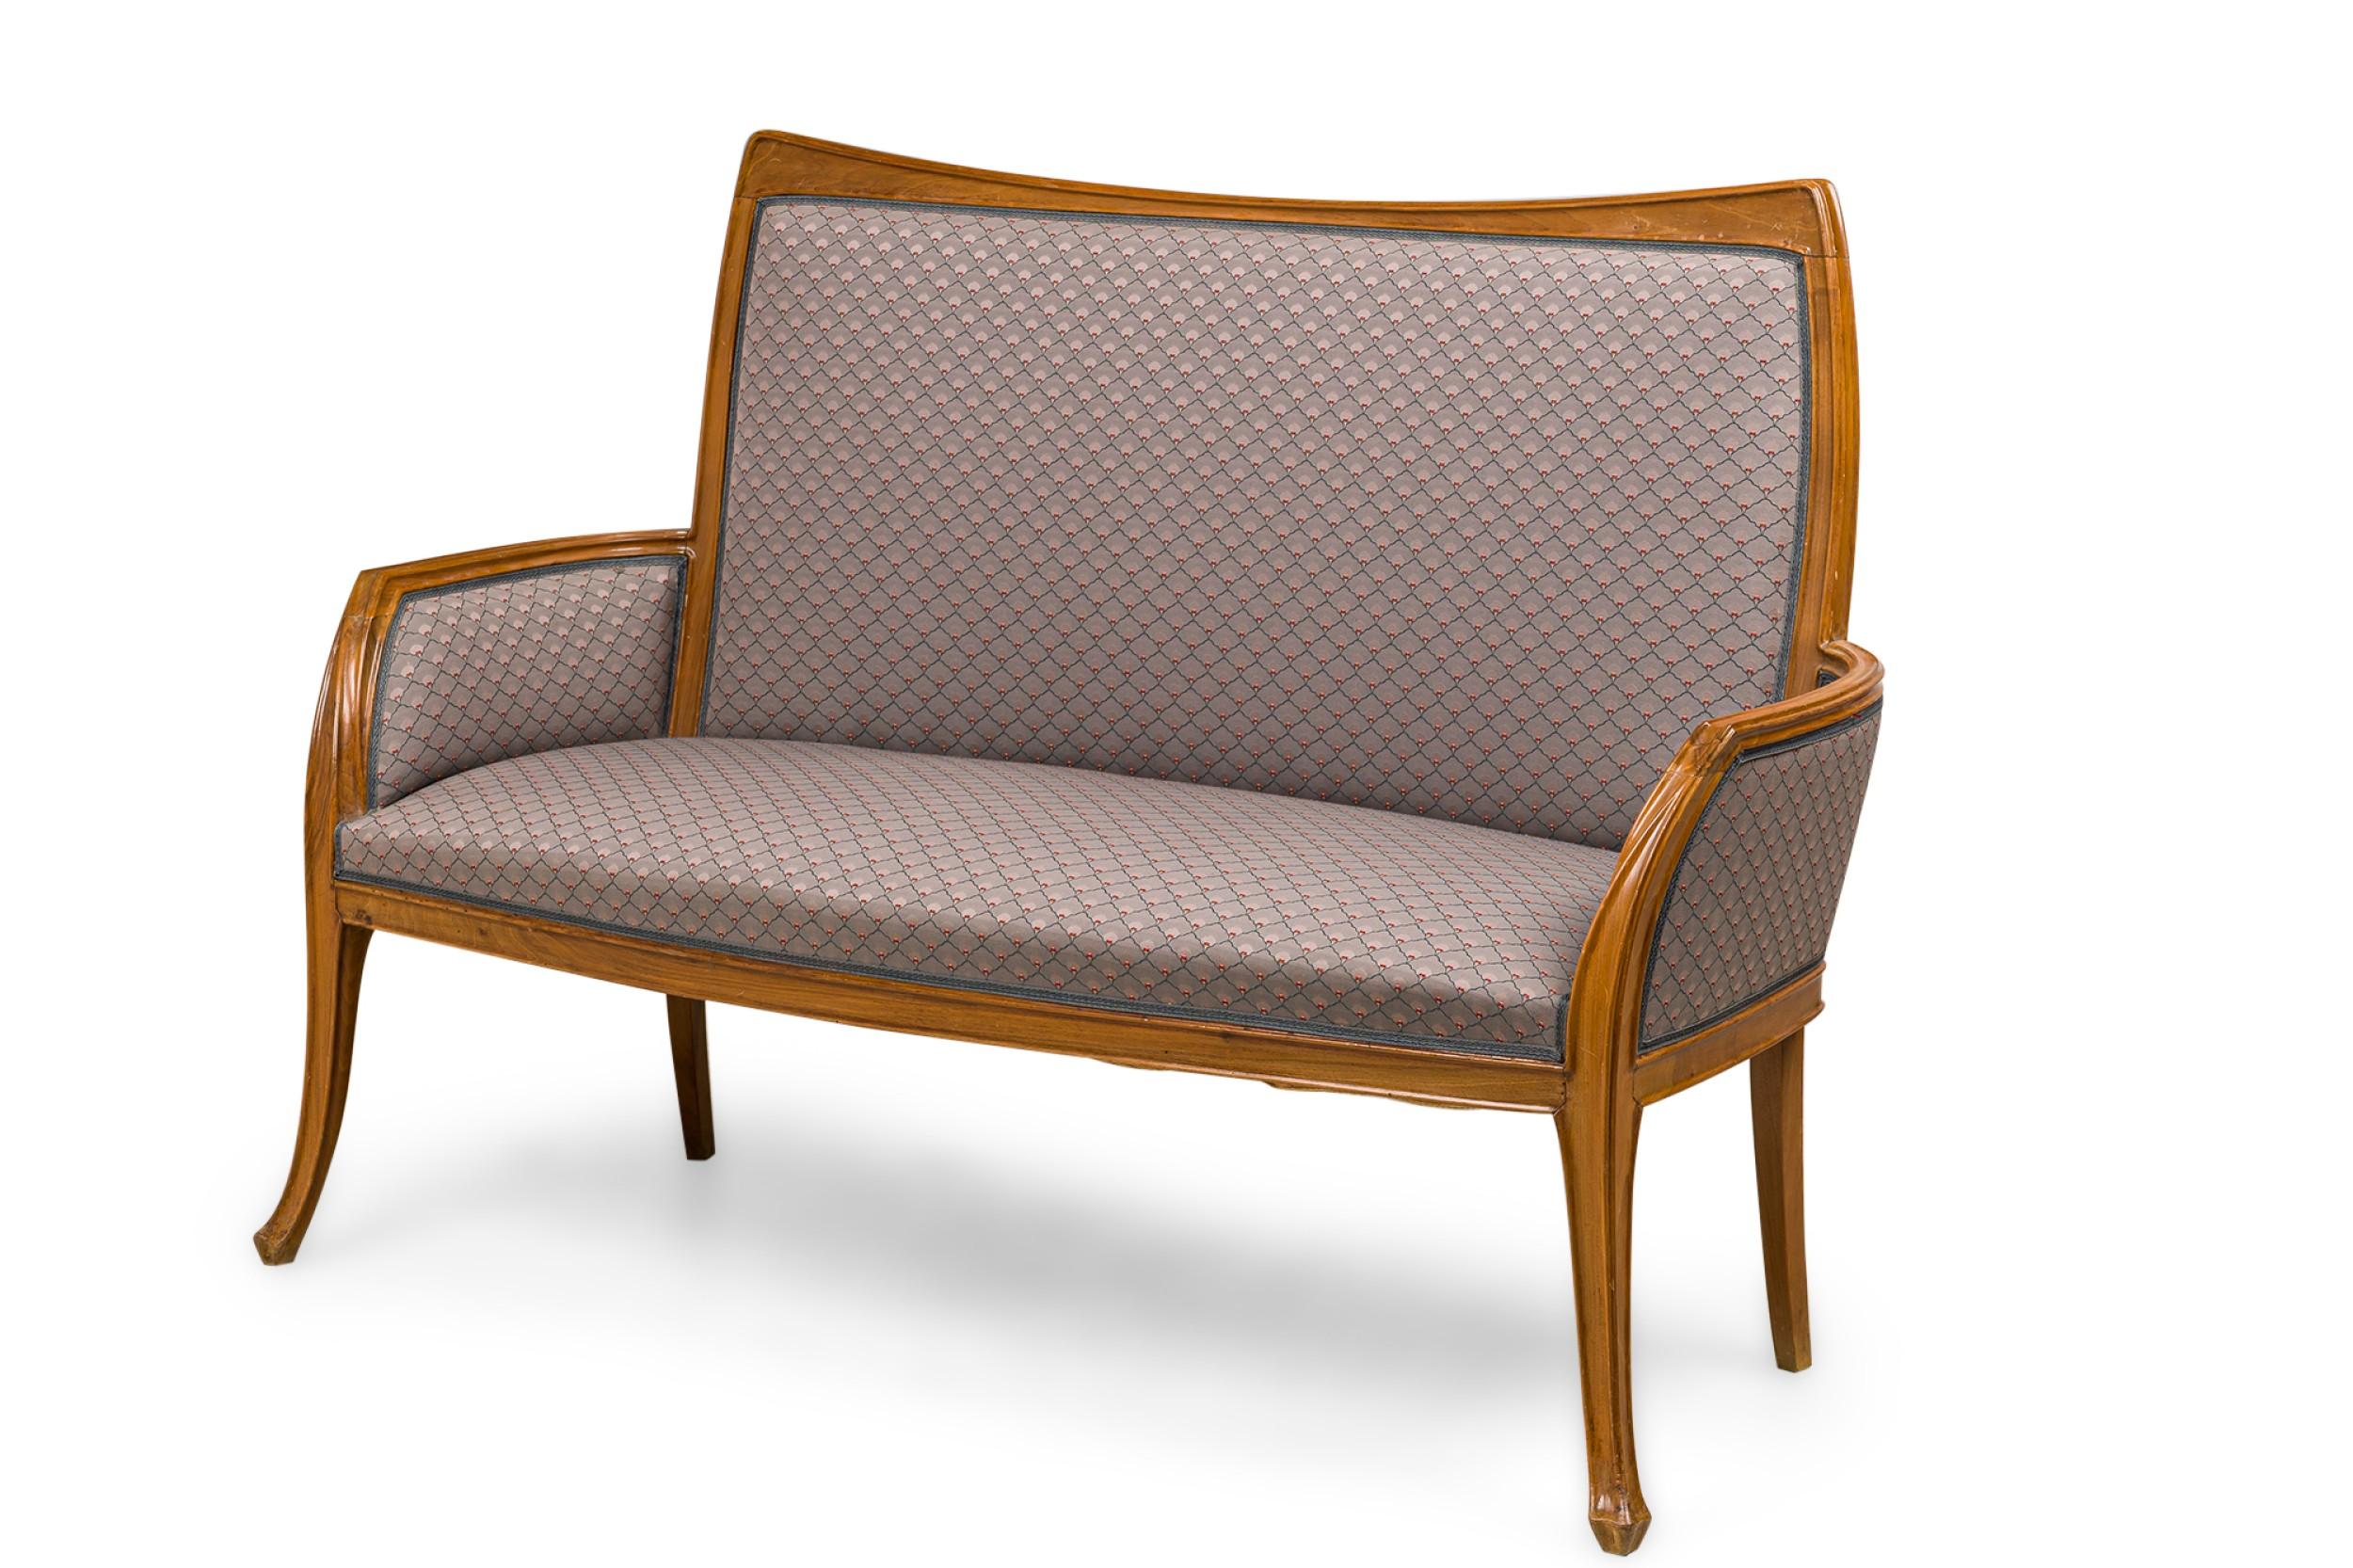 French Art Nouveau walnut frame settee with slightly flaired arms and shaped back upholstered in a lightly patterned gray-blue fabric with matching upholstered pillow. (LOUIS MAJORELLE)
 

 Wear to frame finish